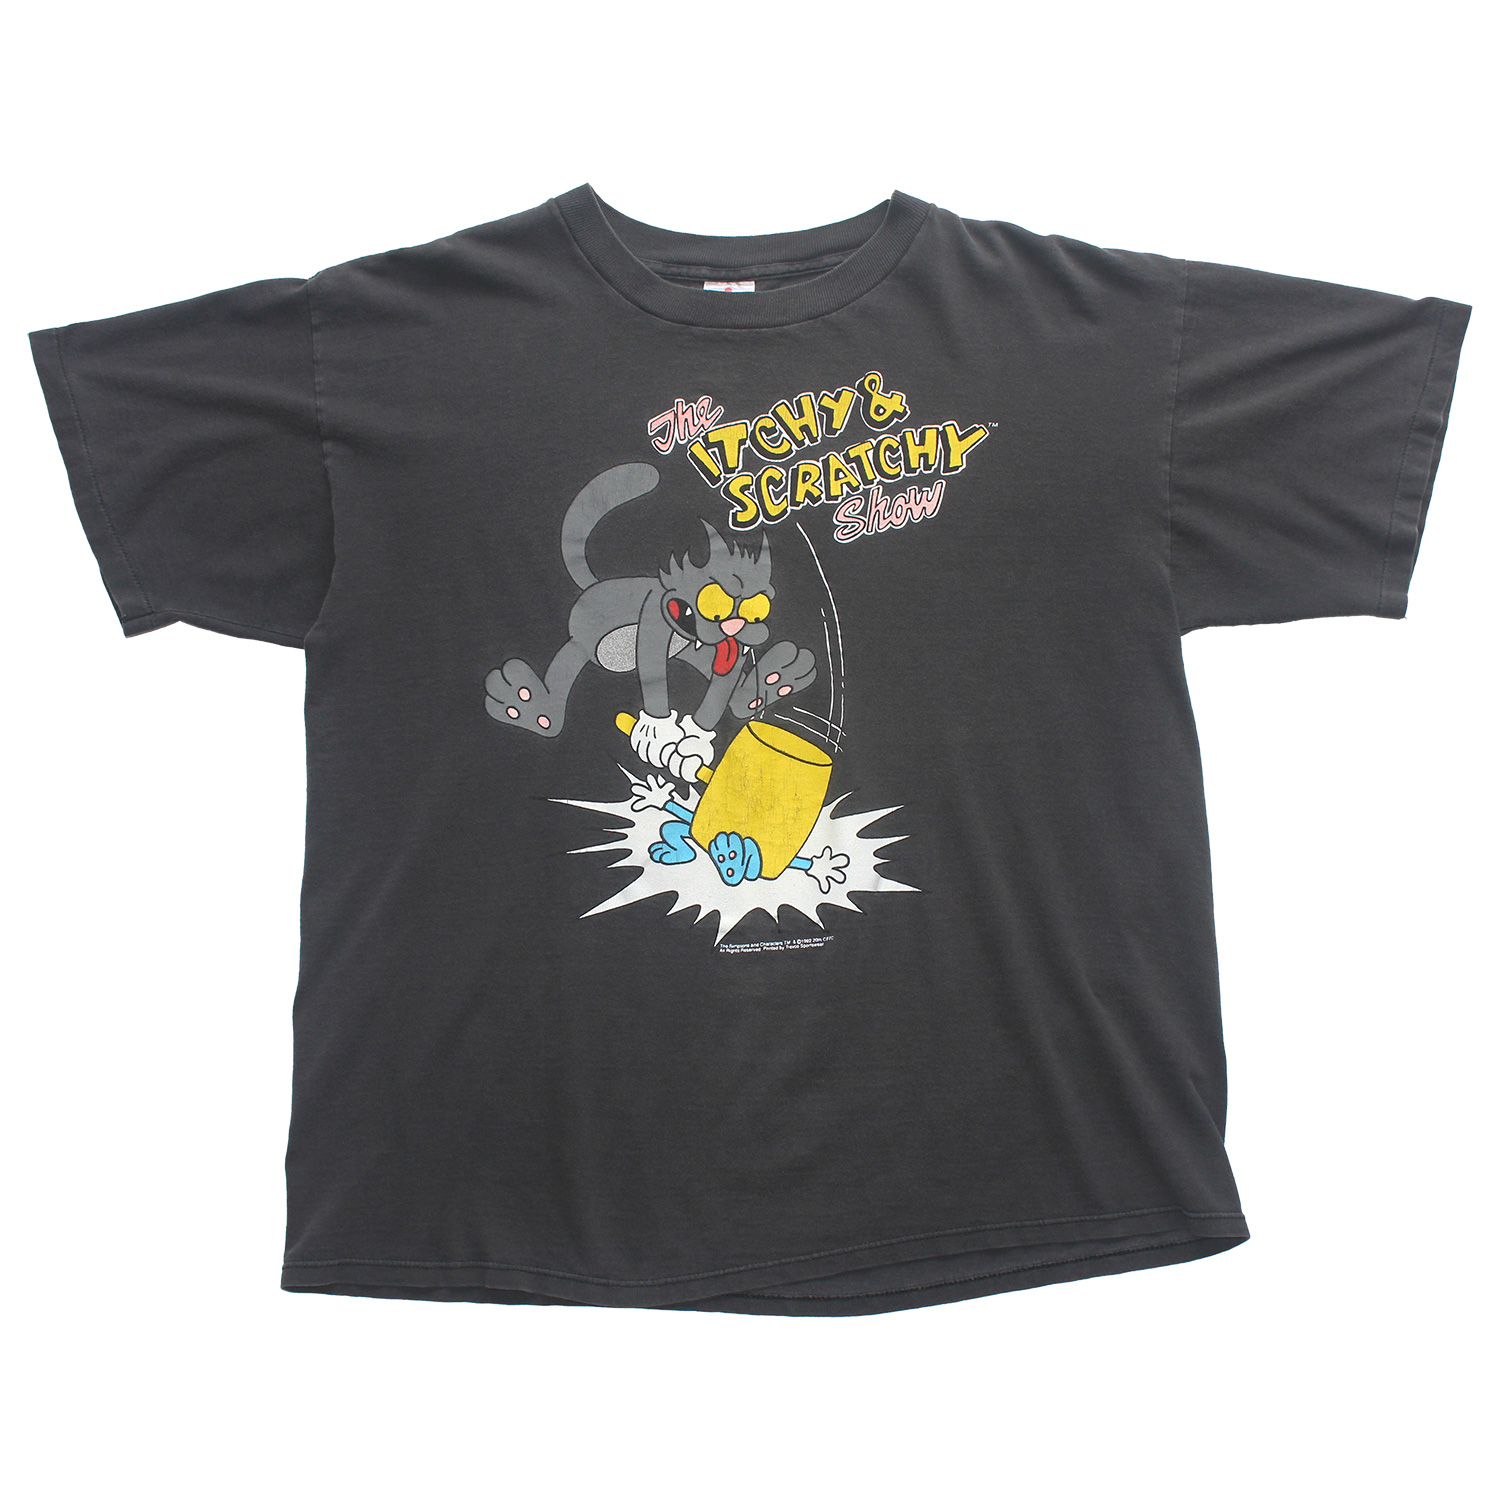 Vintage The Itchy & Scratchy Show T-shirt, Front